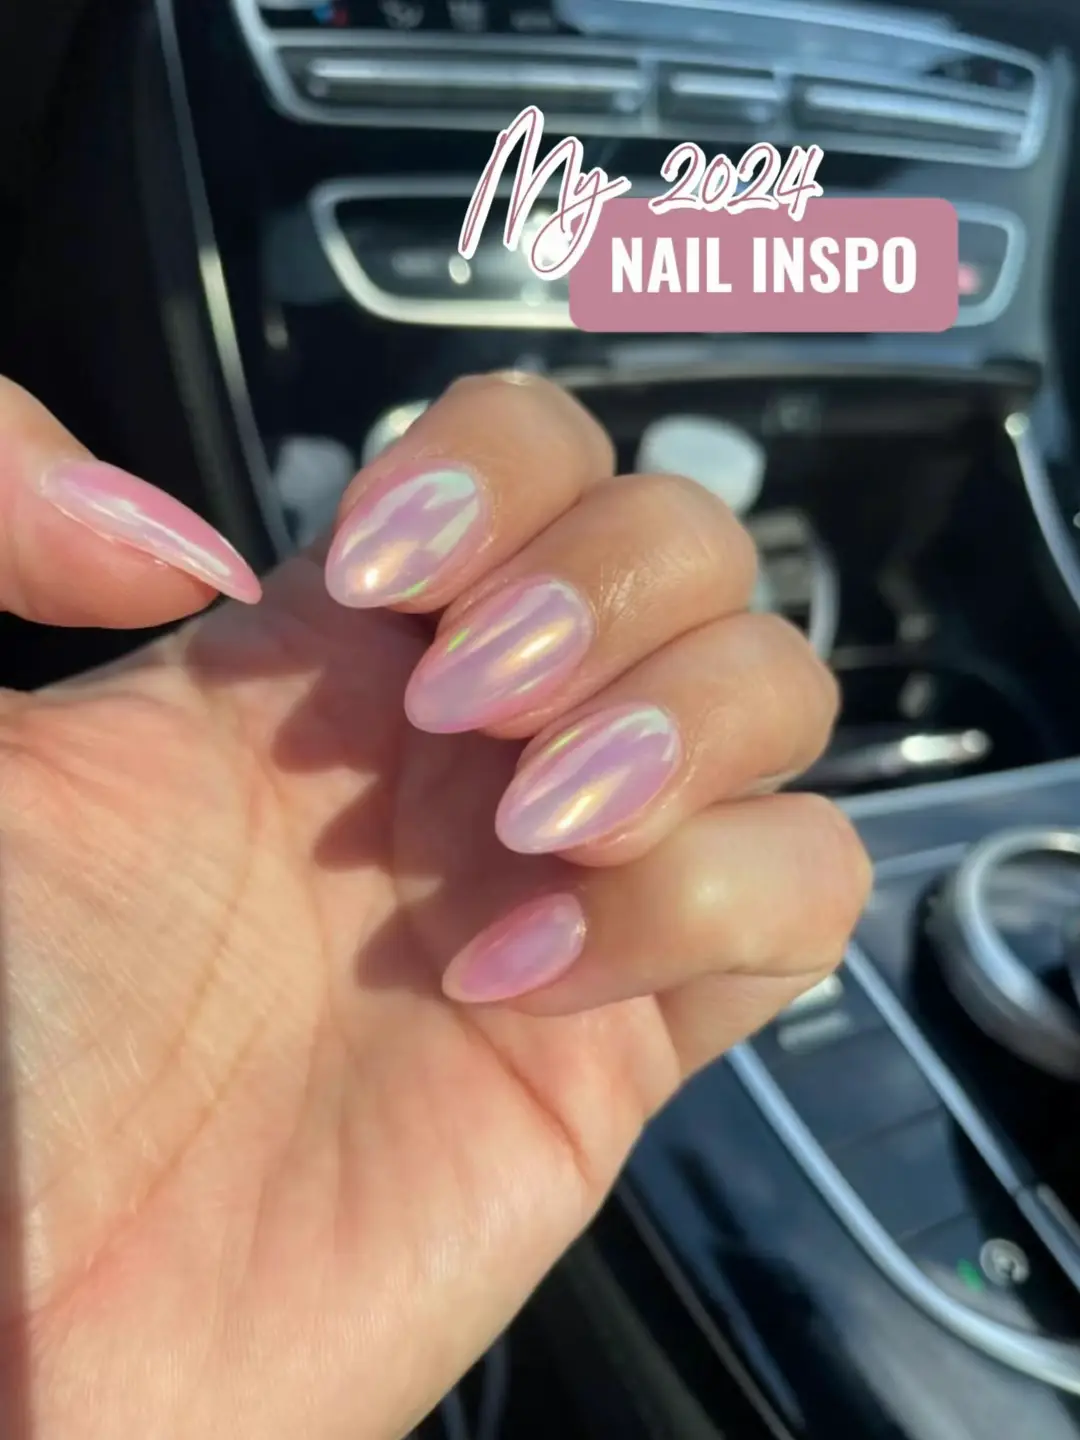 2024 Nail Inspo Gallery posted by Brooke Lemon8